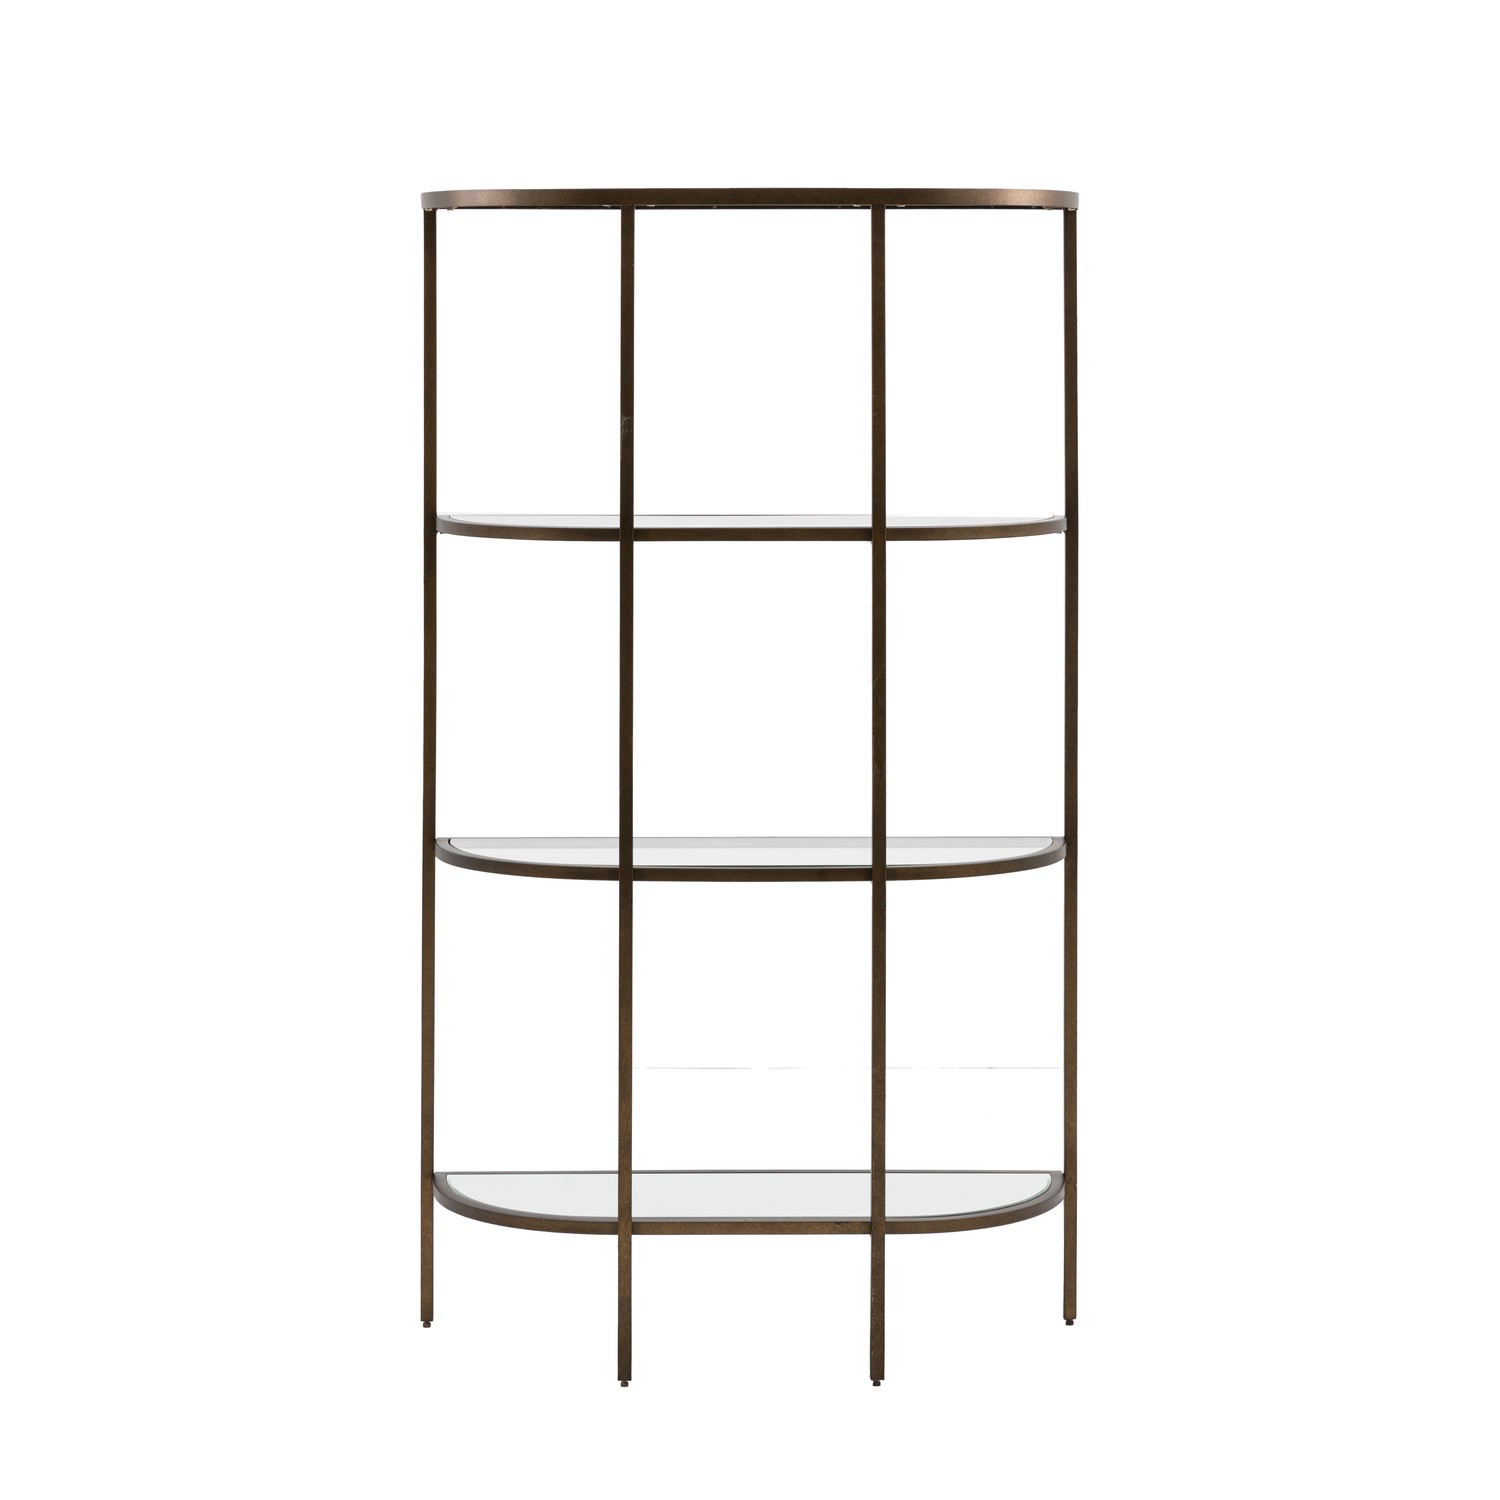 Read more about Hudson glass bookcase in bronze caspian house